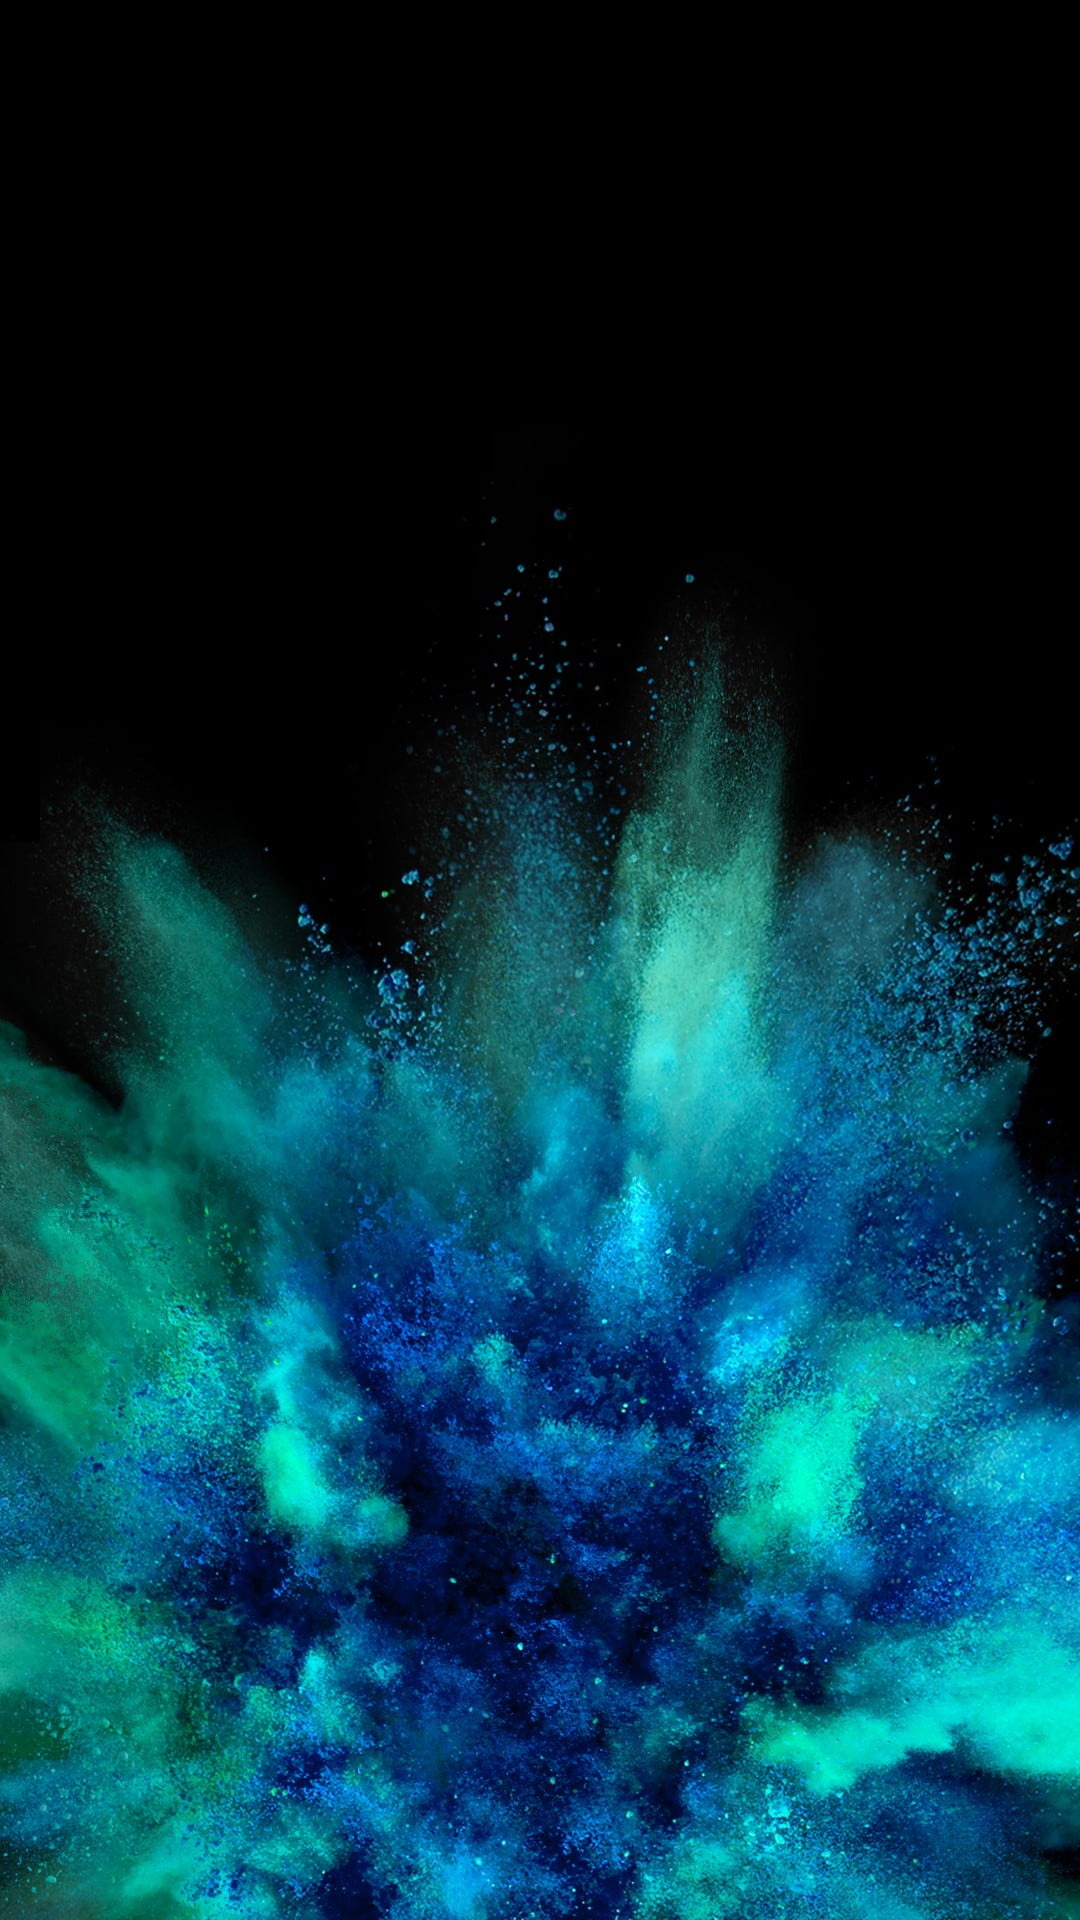 Teal and blue powders, Vibrant colors, Artistic display, Abstract wallpaper, 1080x1920 Full HD Phone